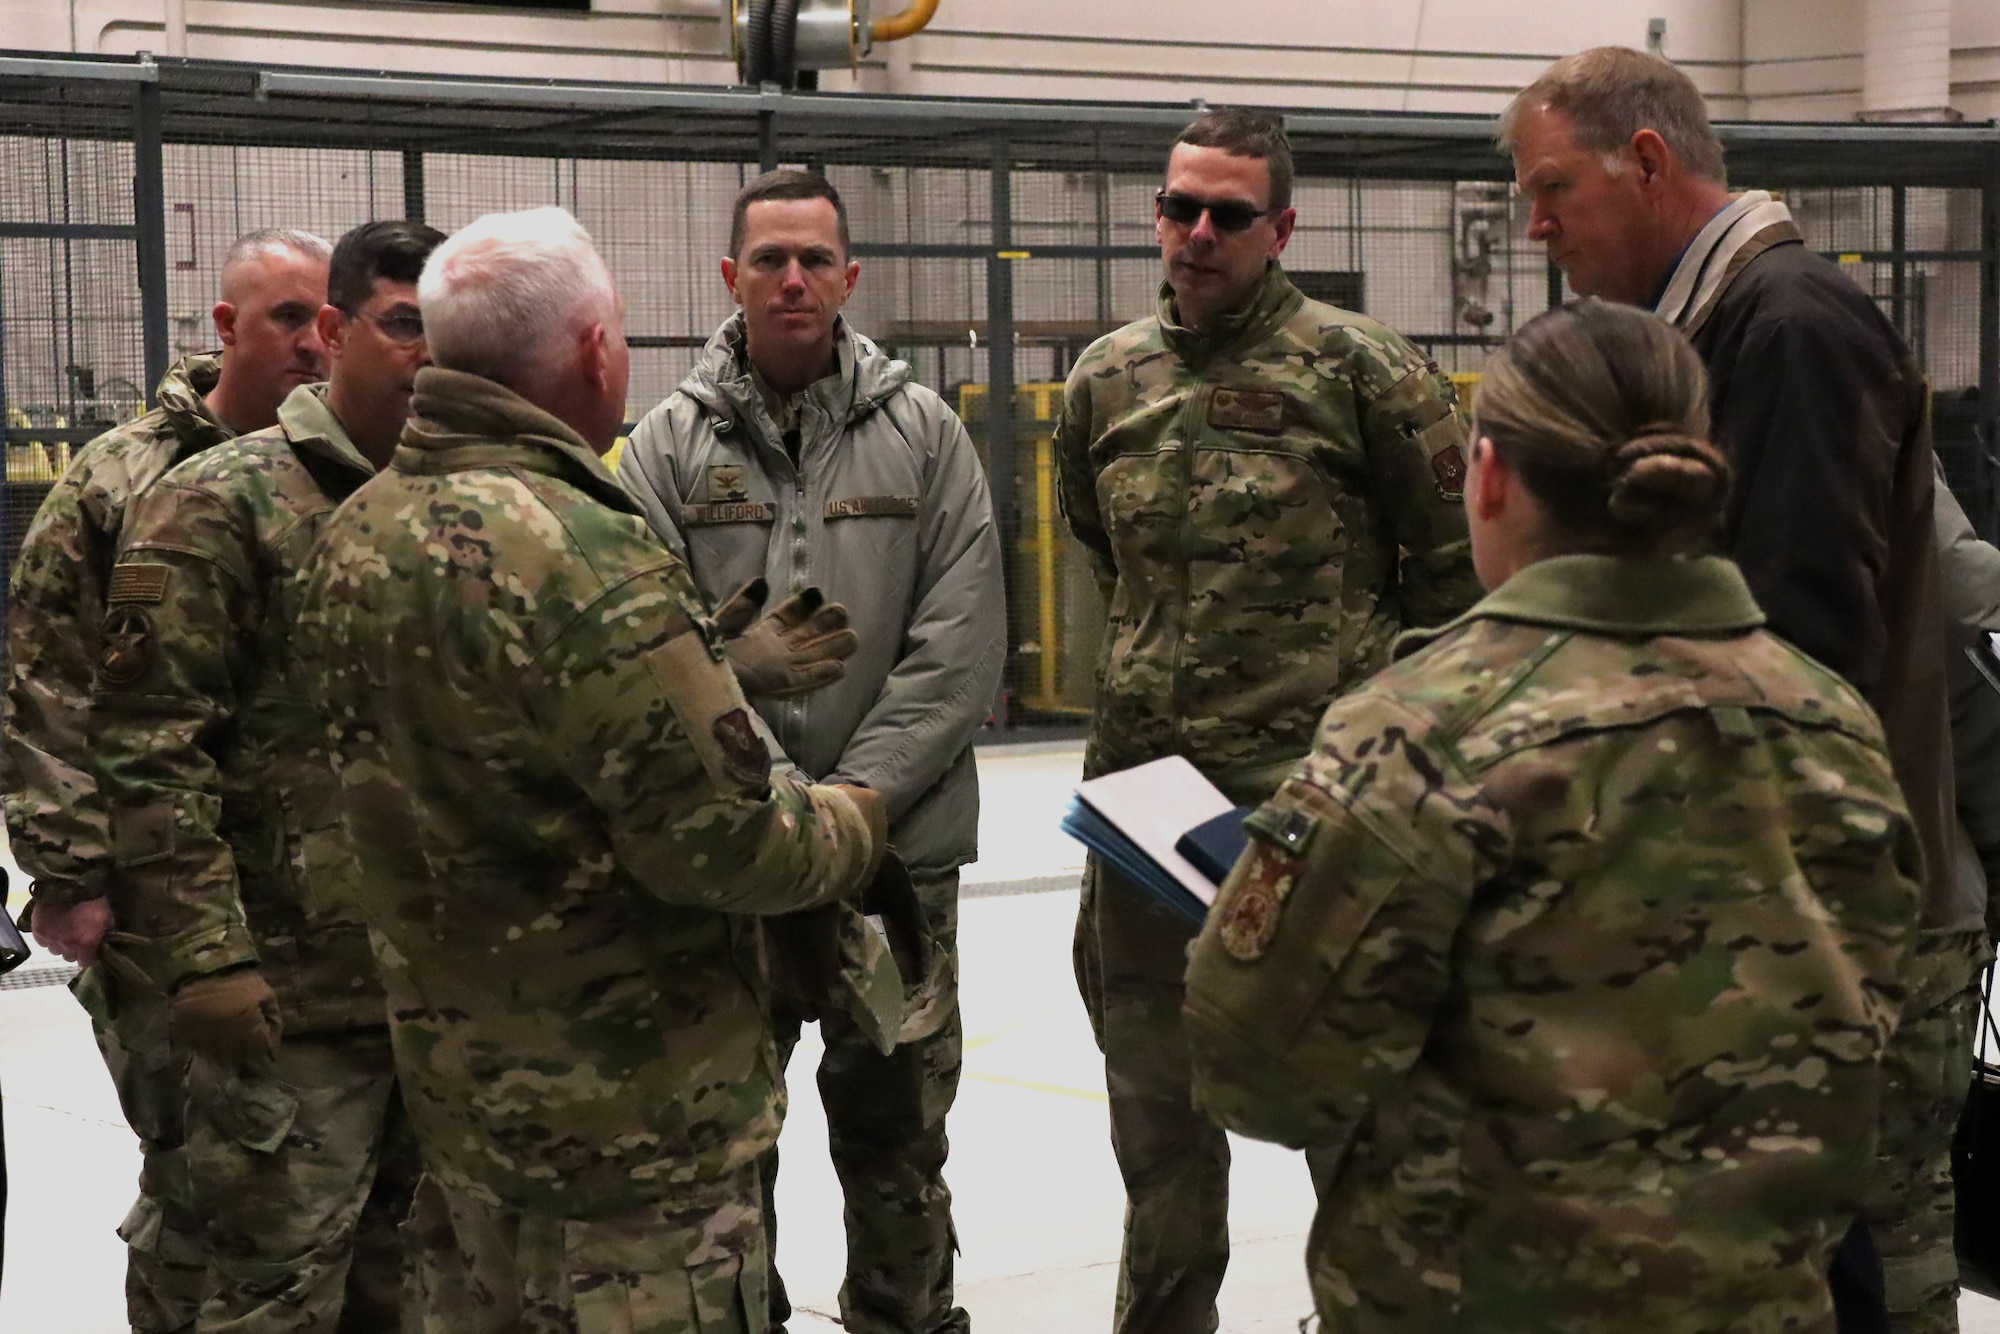 20th Air Force, Air Force Global Strike Command and 341st Missile Wing leadership are informed of operations on a future Missile Maintenance Dispatch Facility.